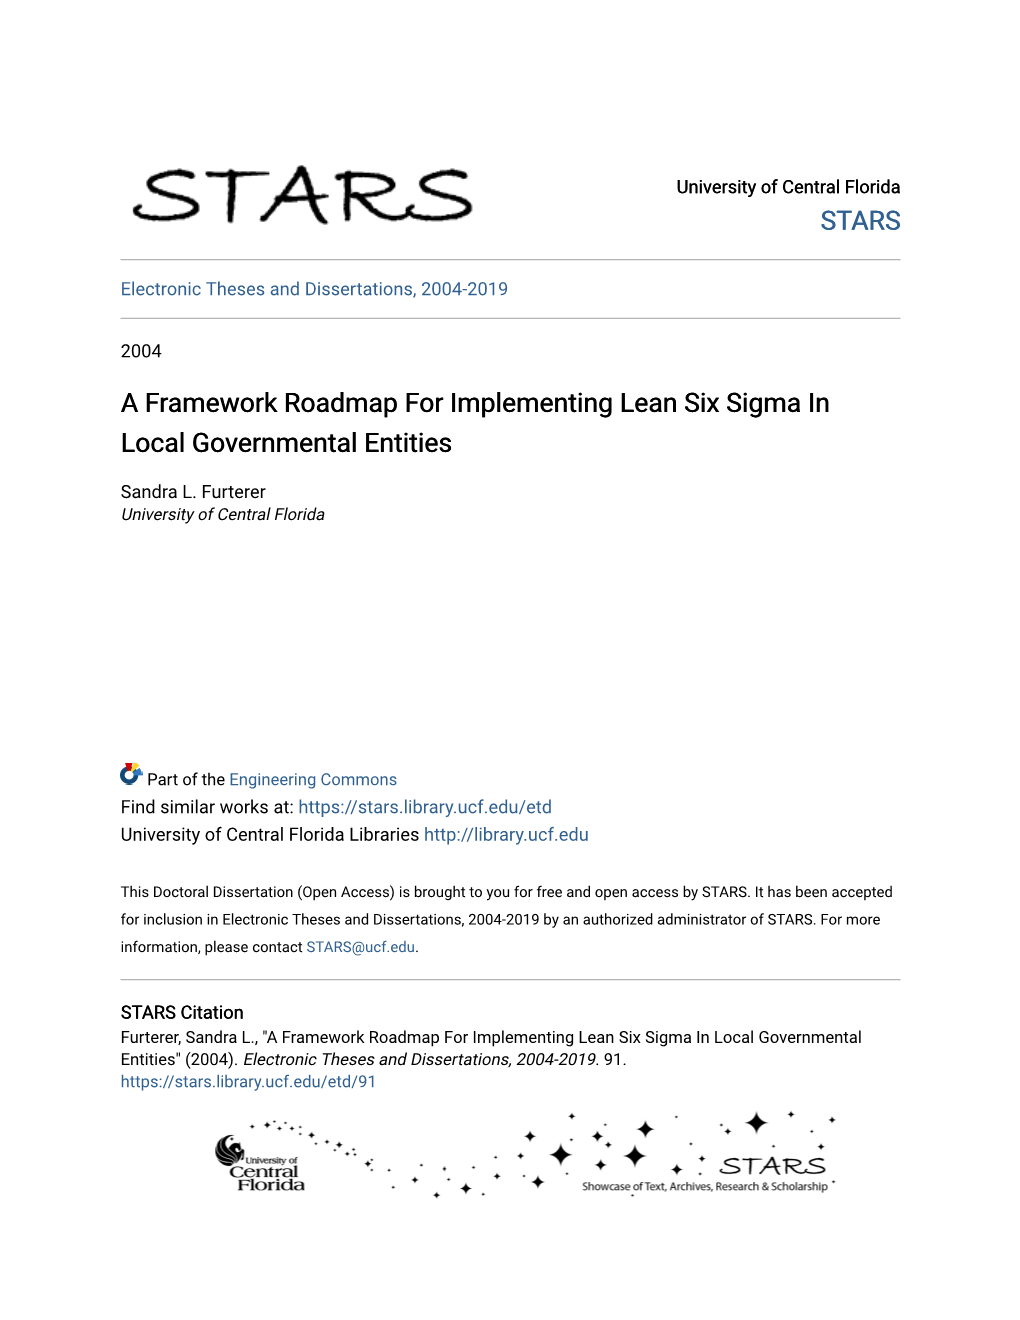 A Framework Roadmap for Implementing Lean Six Sigma in Local Governmental Entities